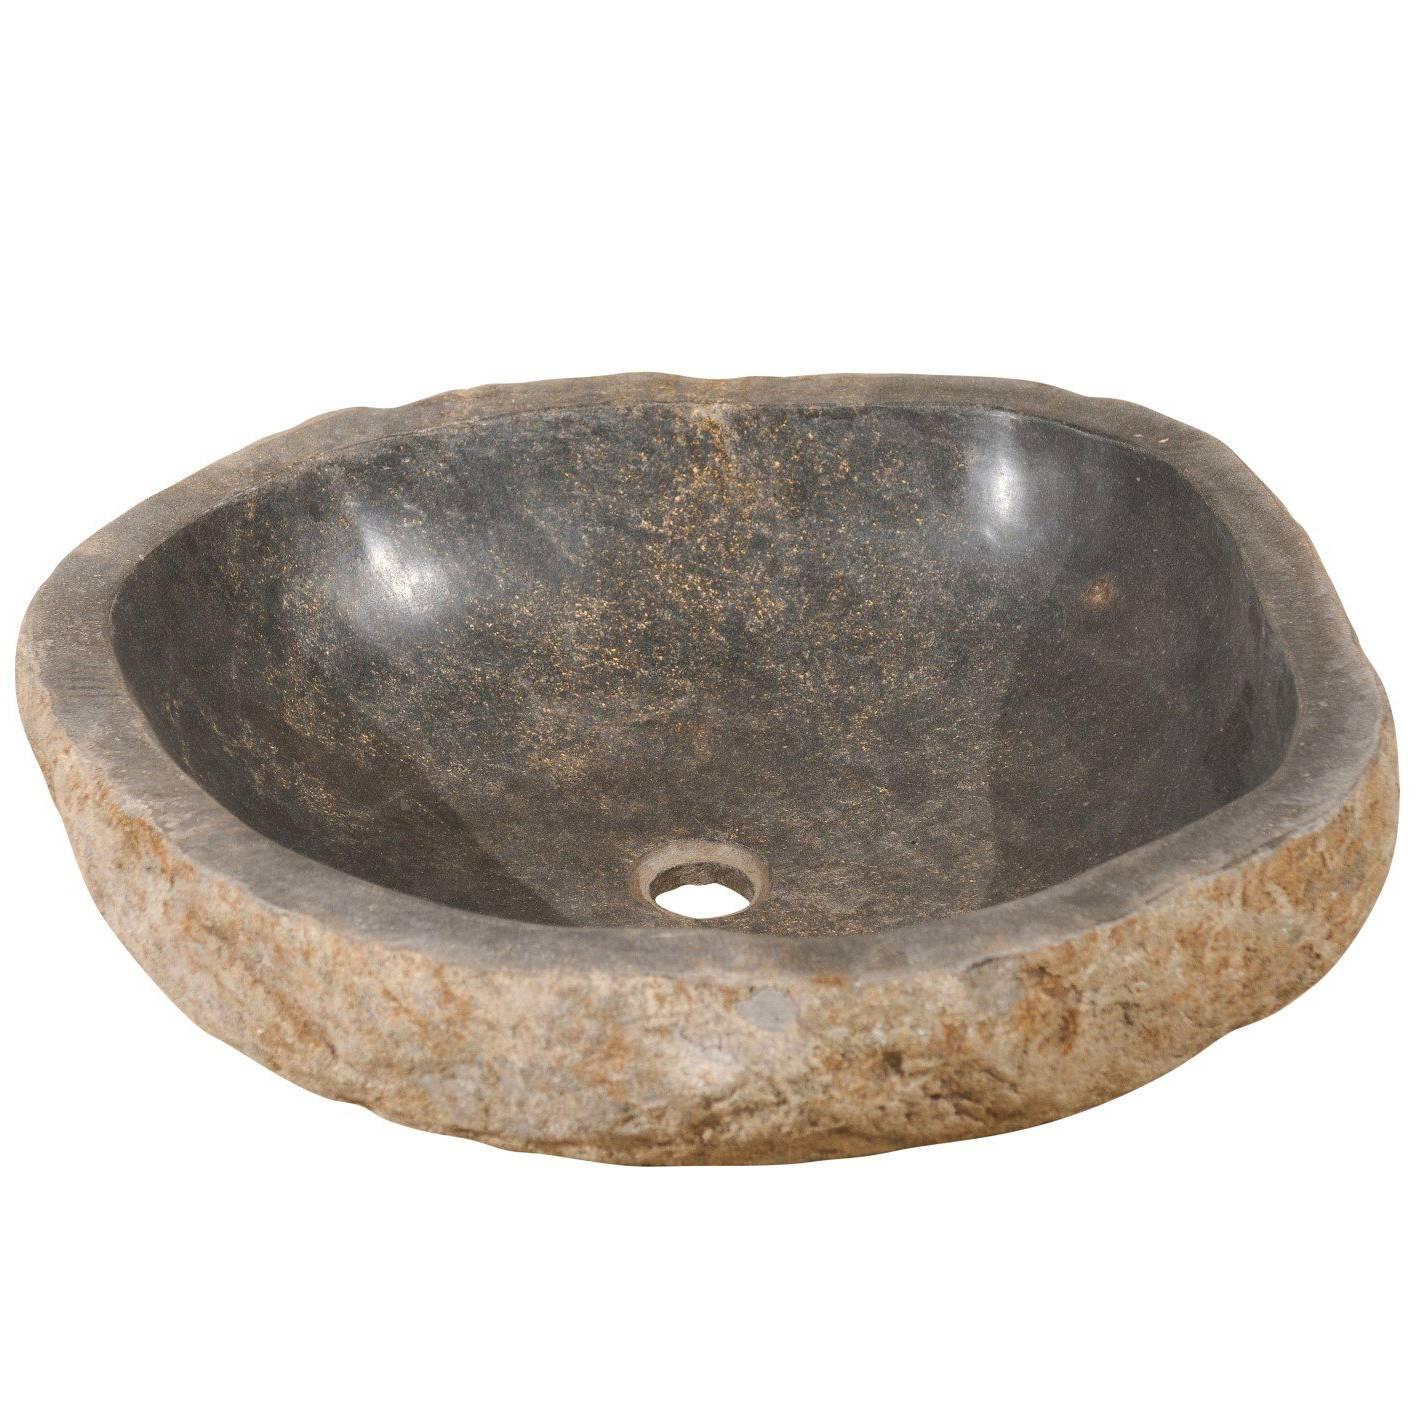 Sink Made from a River Rock / Boulder with Polished Black Interior, Tan Exterior